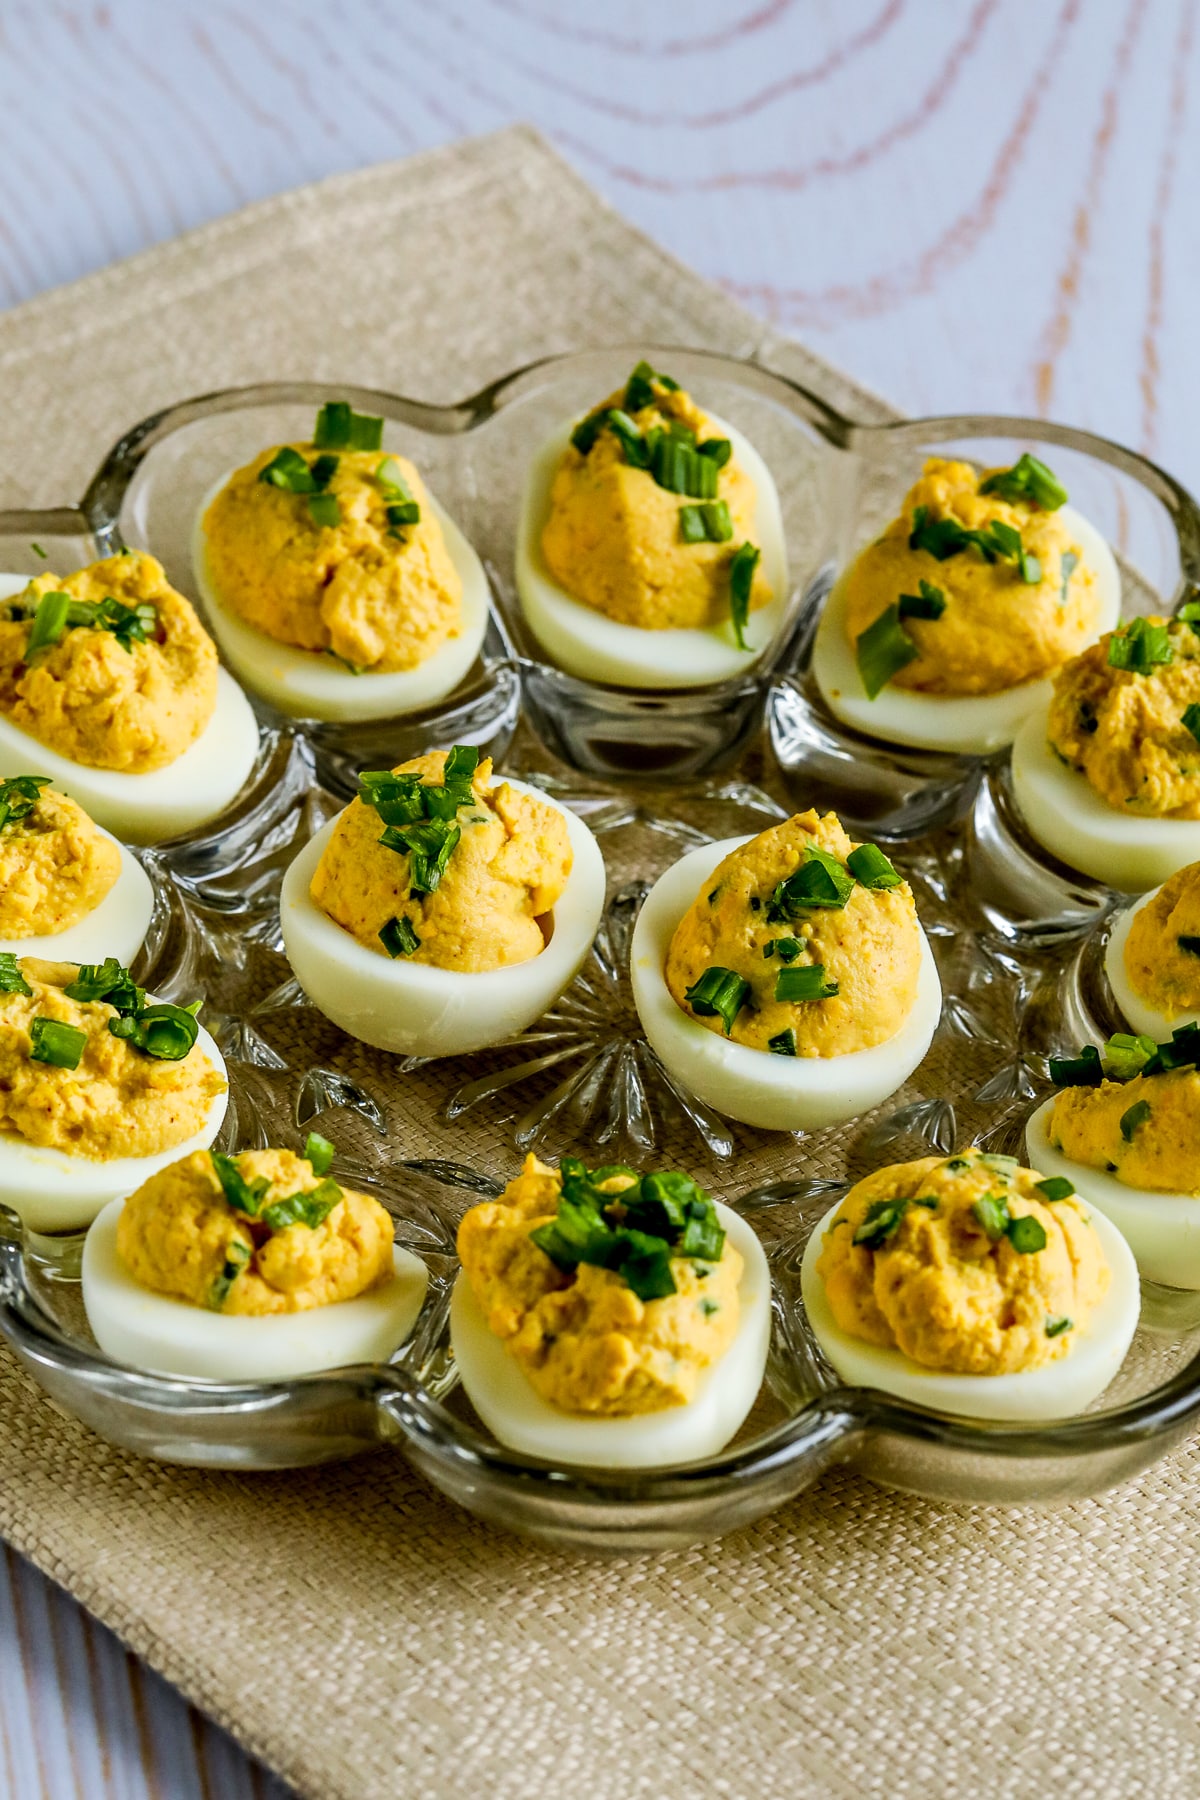 Spicy Deviled Eggs (with Chipotle and Lime) shown in glass egg dish.